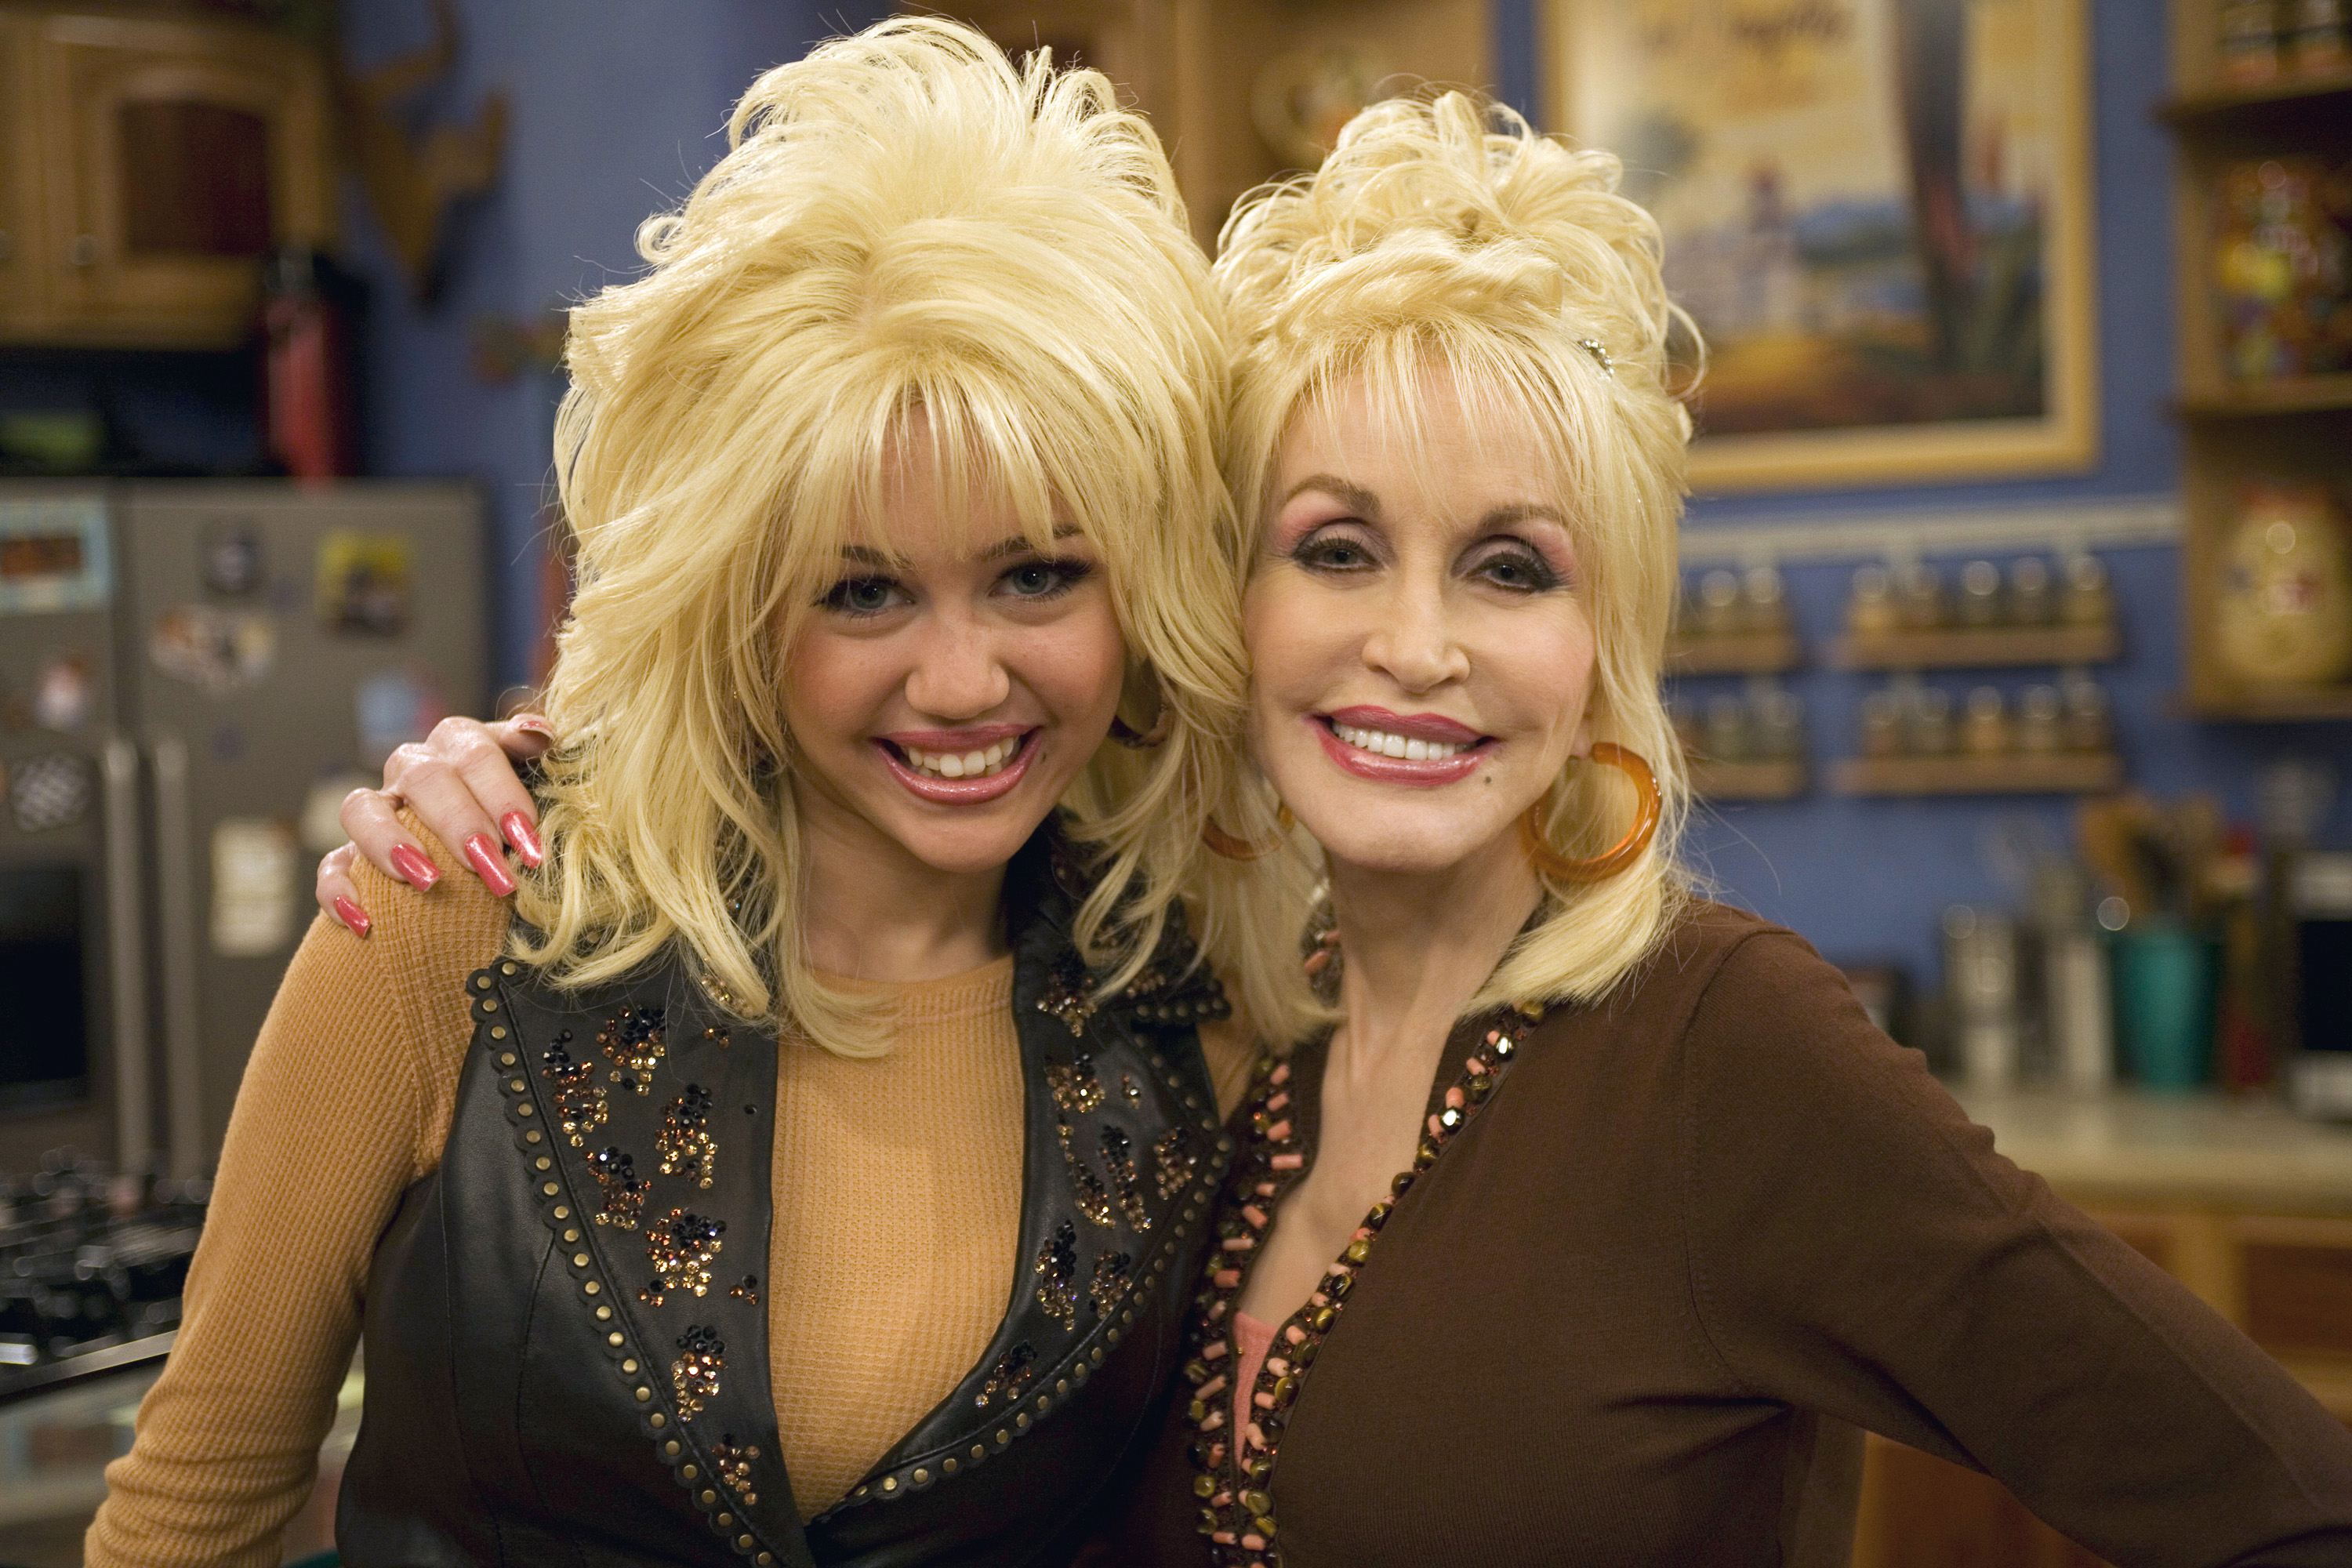 Miley Cyrus and Dolly Parton in 'Hannah Montana'